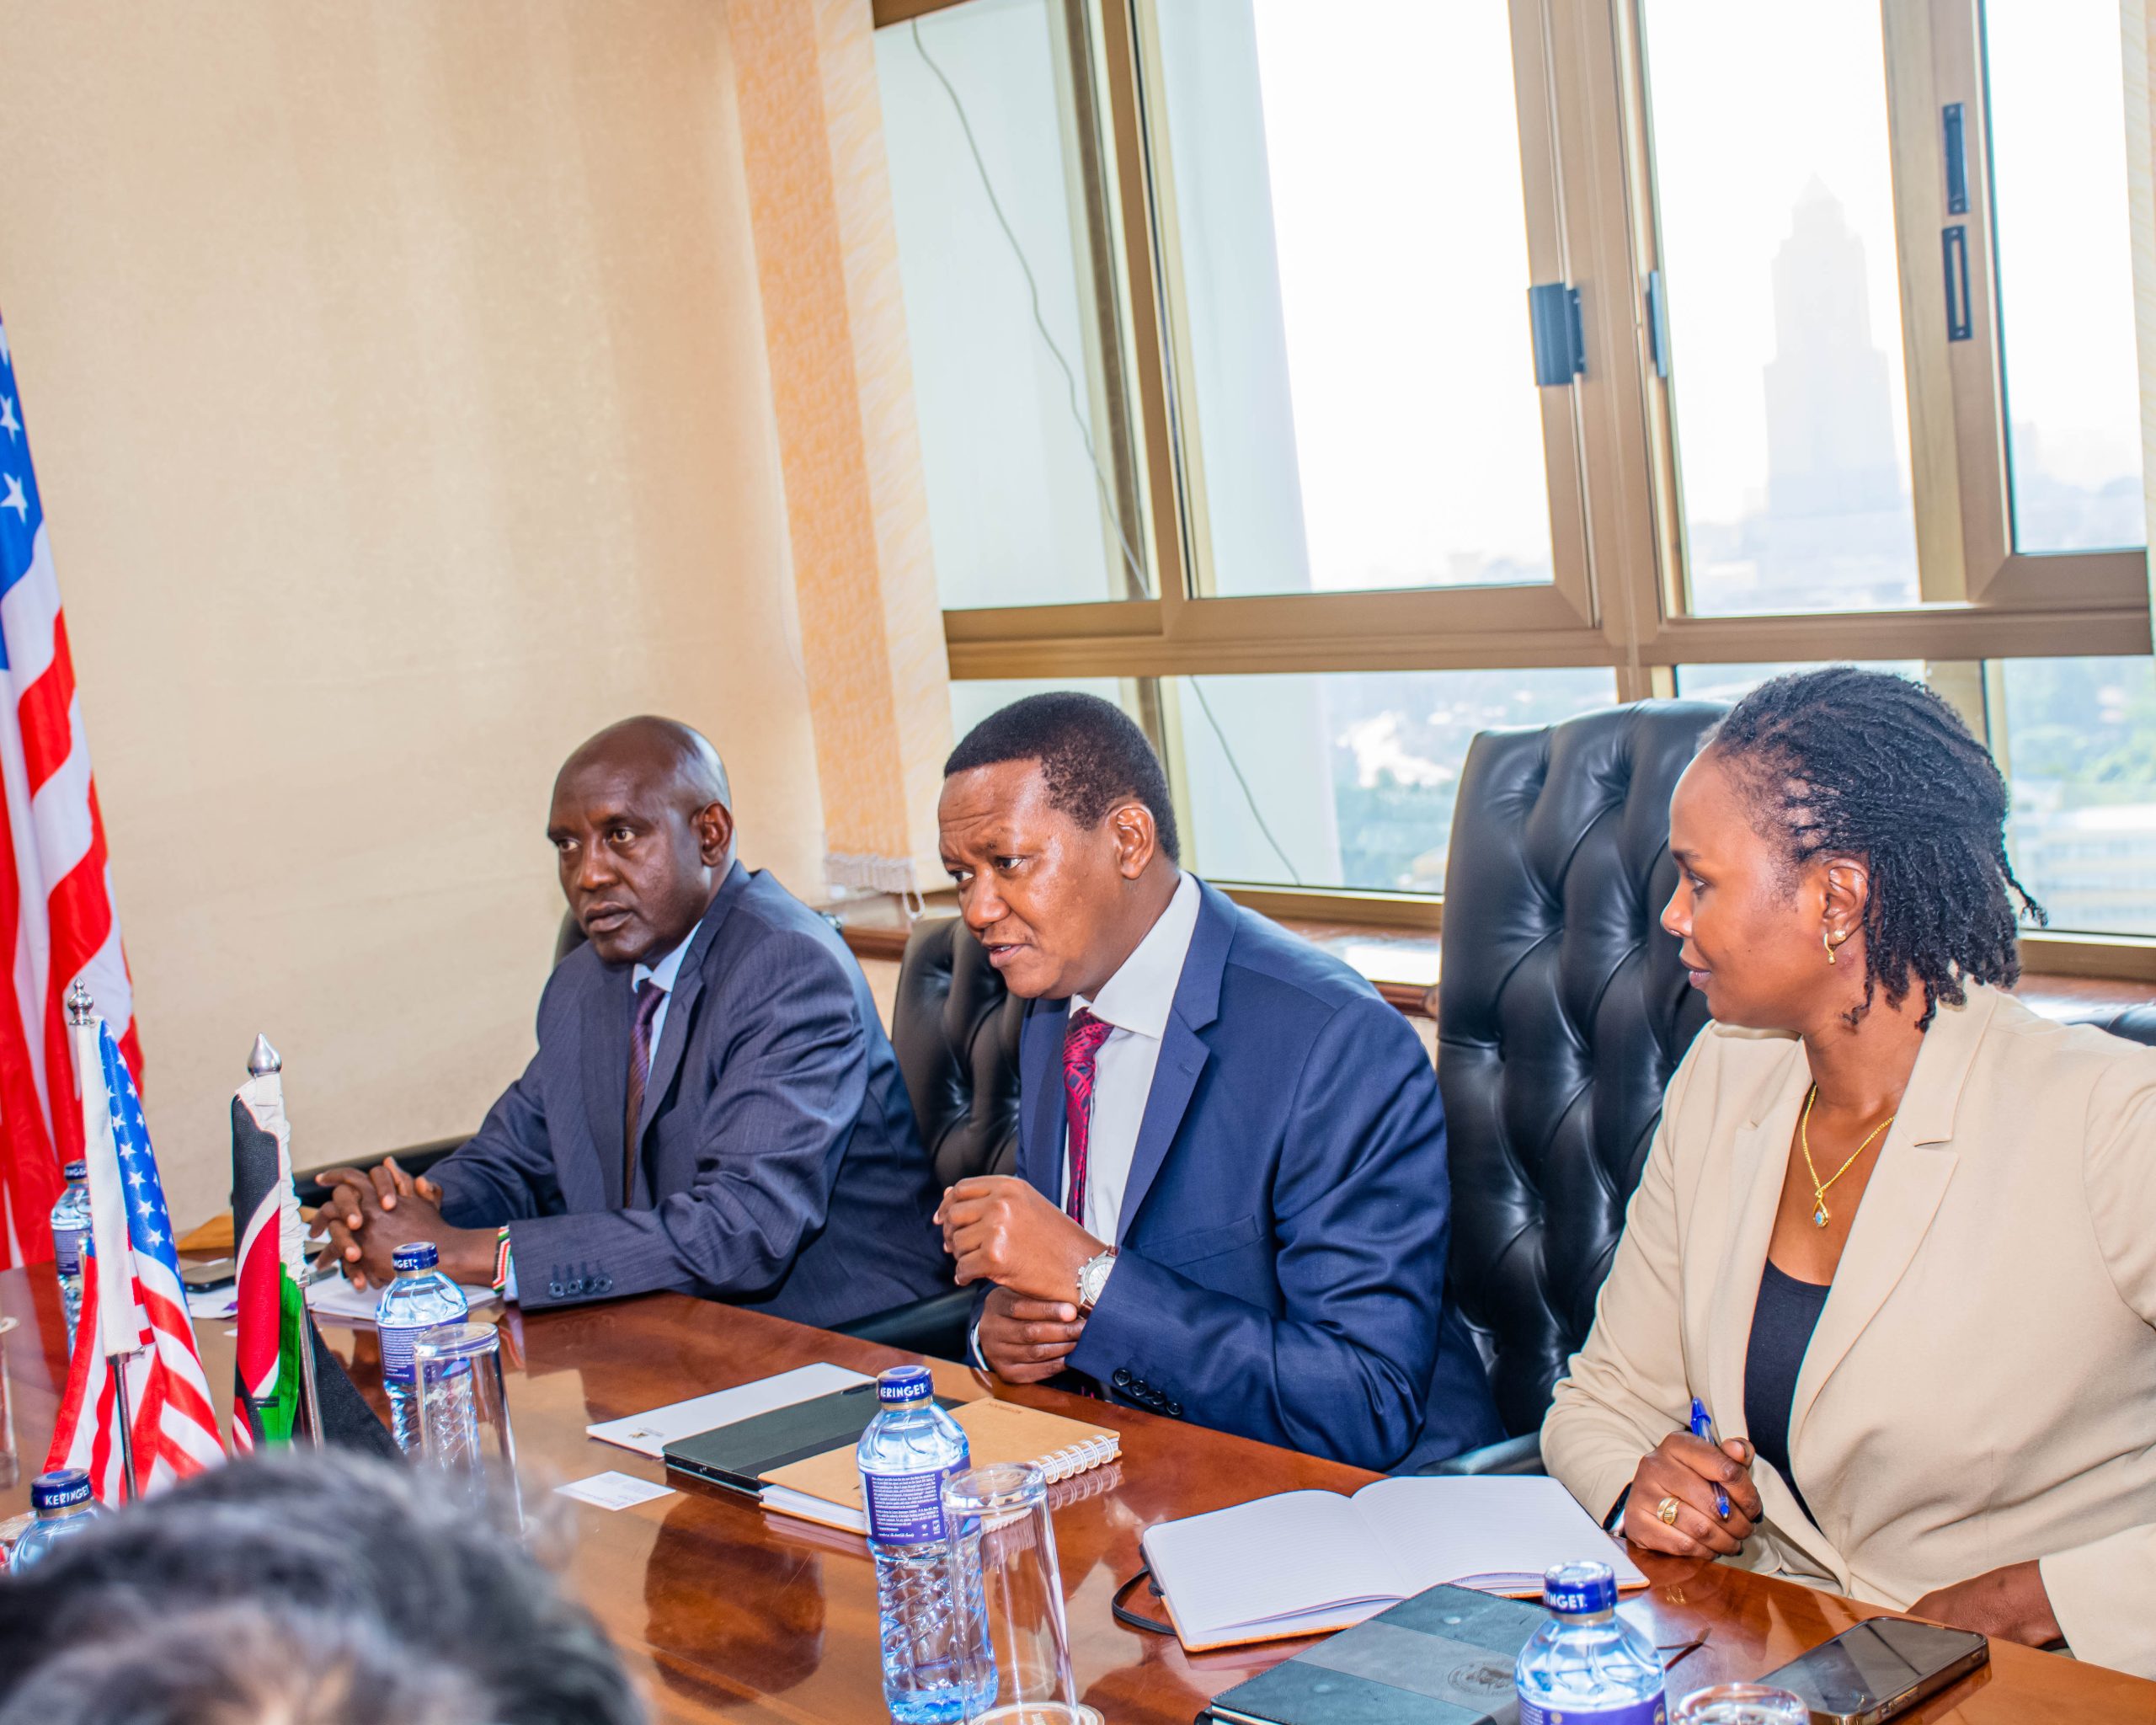 The Principal Secretary State Department for Tourism, John Ololtuaa (left), the Cabinet Secretary Ministry of Tourism and Wildlife, Dr. Alfred Mutua (centre), and the Principal Secretary State Department for Wildlife, Silvia Museiya (right), during the meeting.